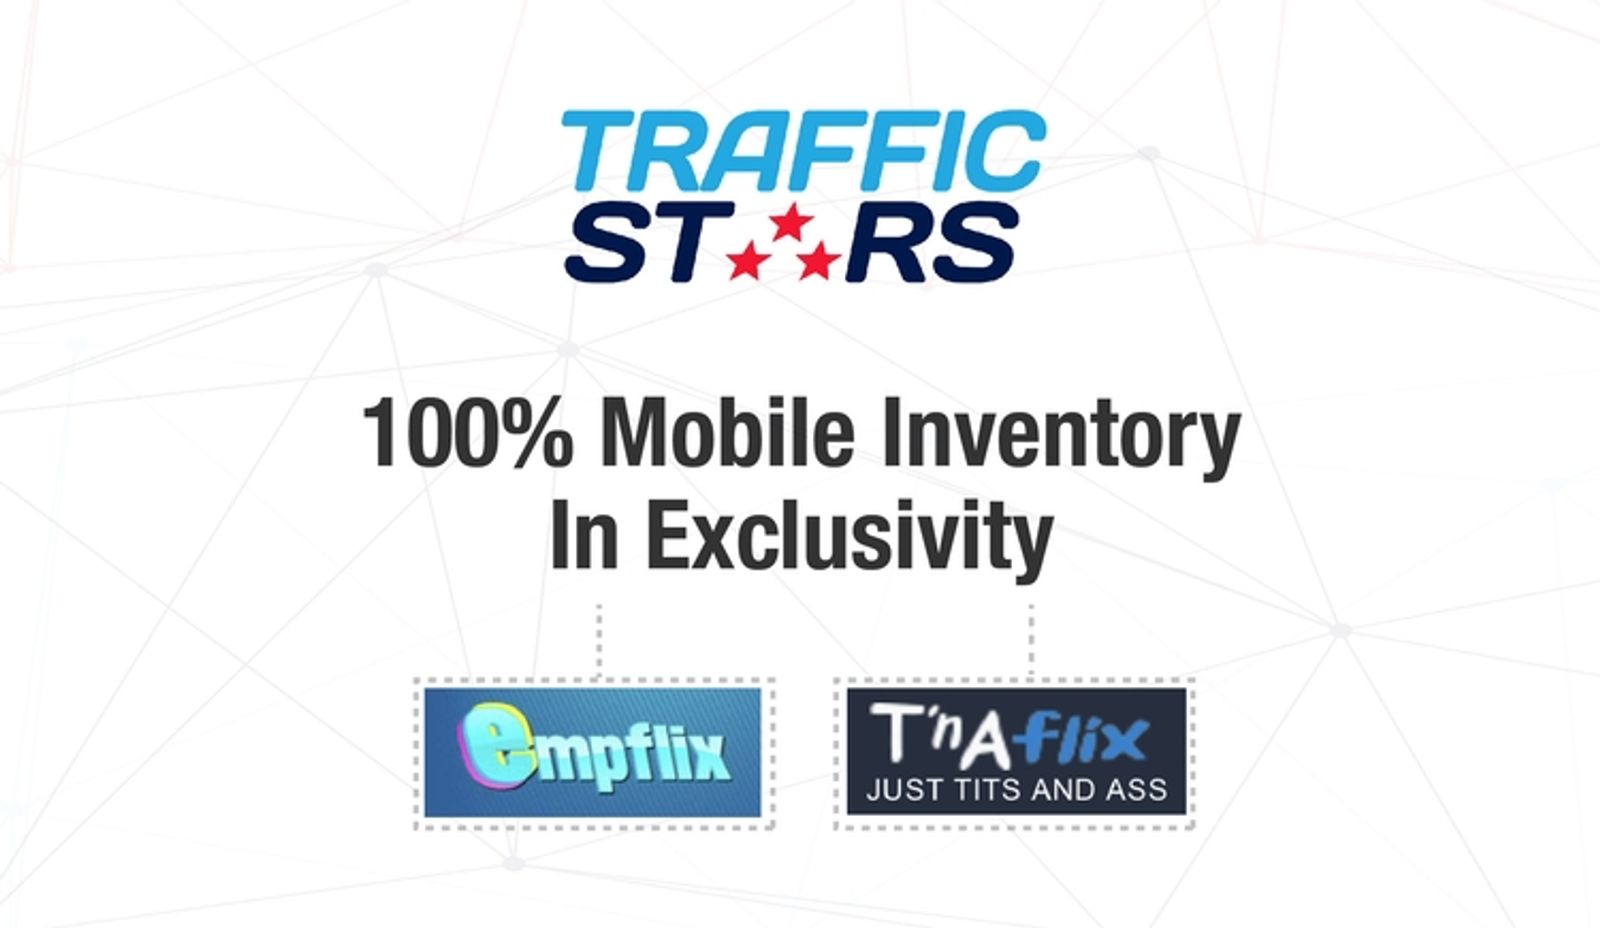 TrafficStars Signs Exclusive Deal With TNAFlix for Mobile Spots